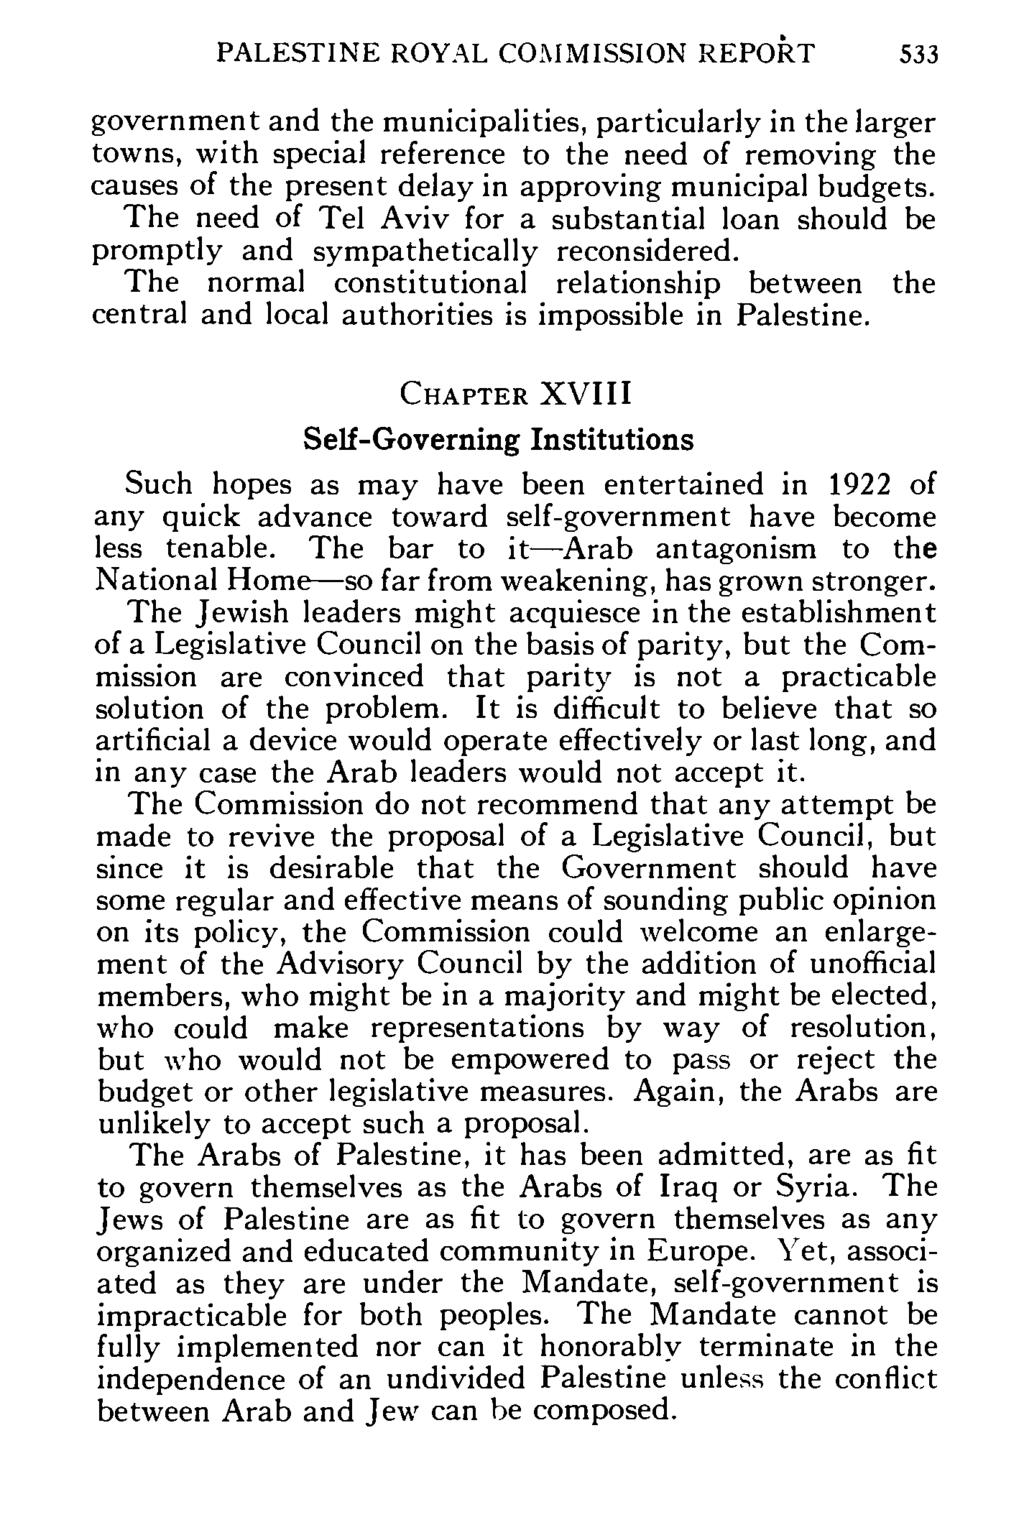 PALESTINE ROYAL COMMISSION REPORT 533 government and the municipalities, particularly in the larger towns, with special reference to the need of removing the causes of the present delay in approving